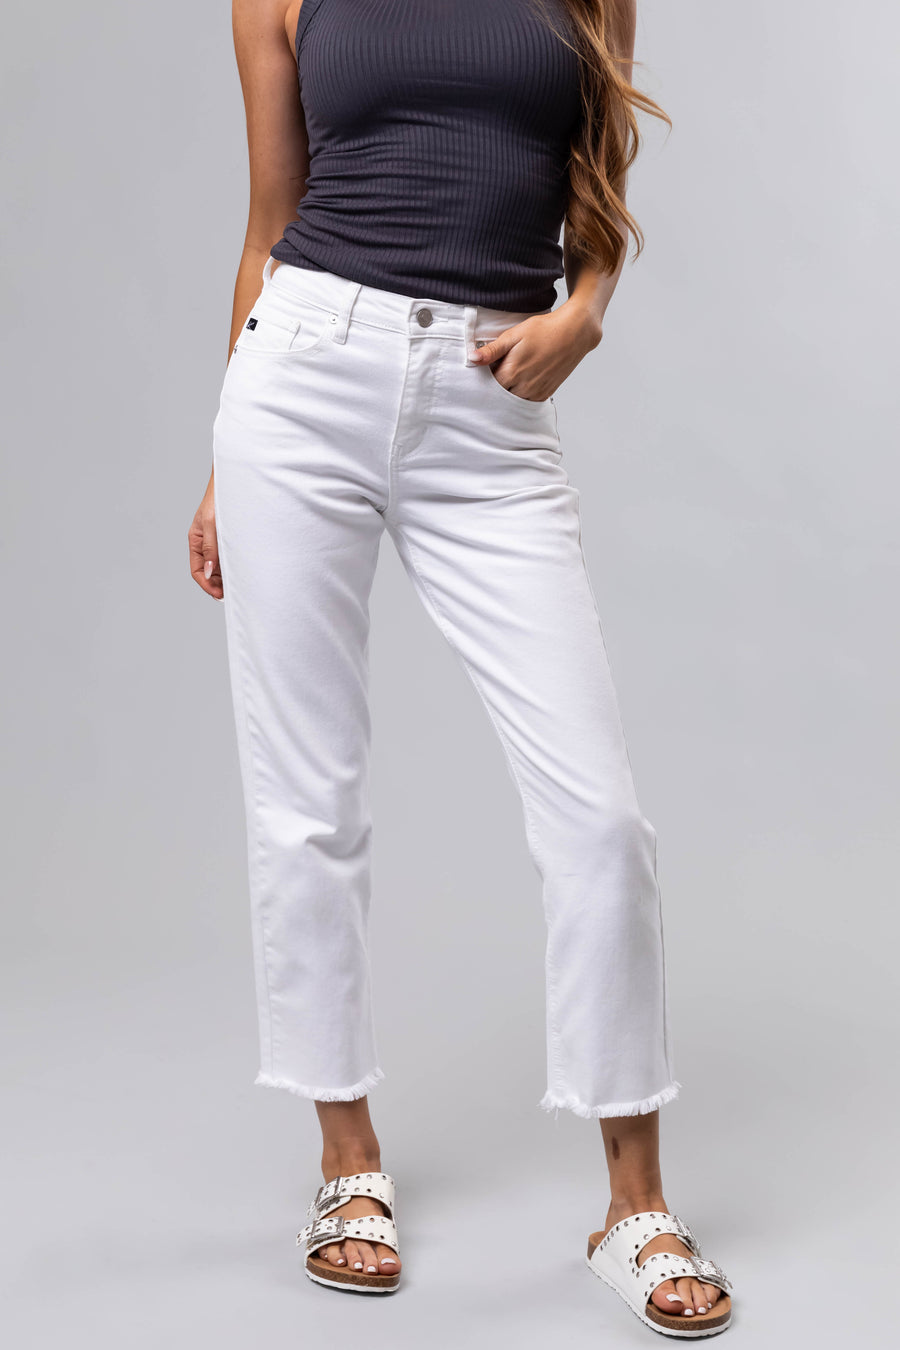 KanCan Off White Cropped Straight Leg Jeans